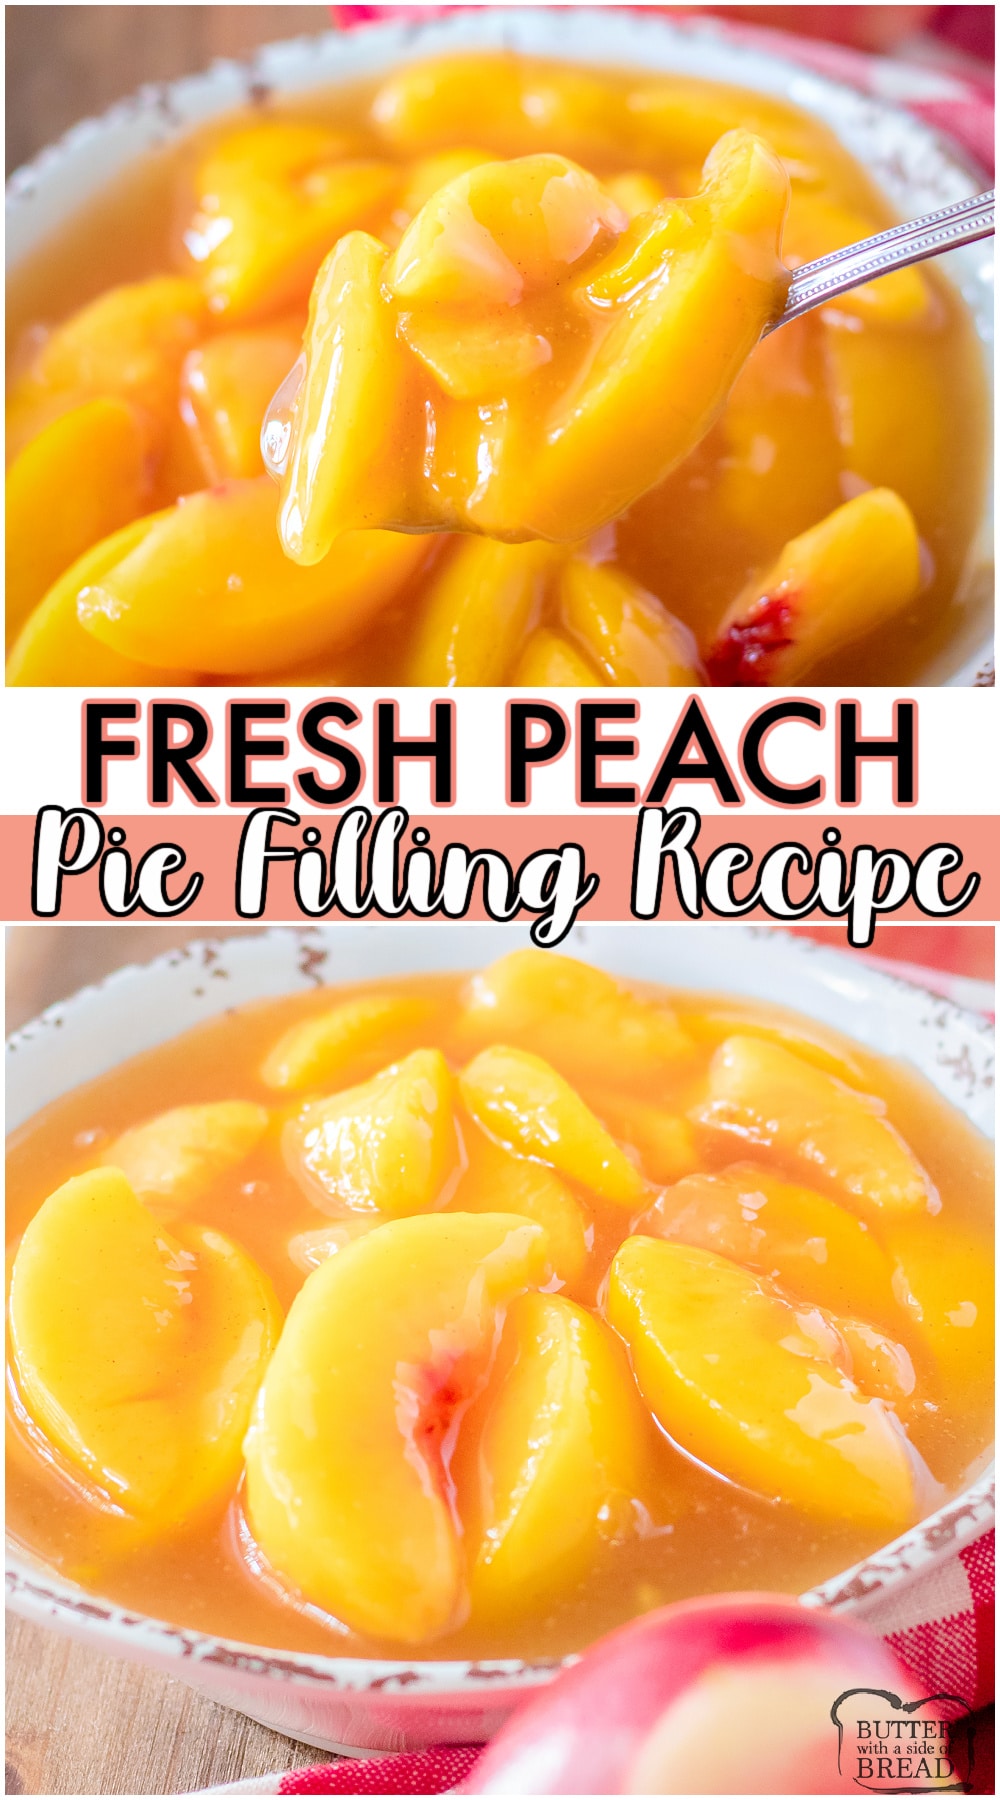 Peach pie filling recipe made with your favorite ripe peaches & simple pantry ingredients! Easy recipe for peach filling to use in pies, cobblers, tarts, or on ice cream! #peach #piefilling #peaches #easyrecipe from BUTTER WITH A SIDE OF BREAD